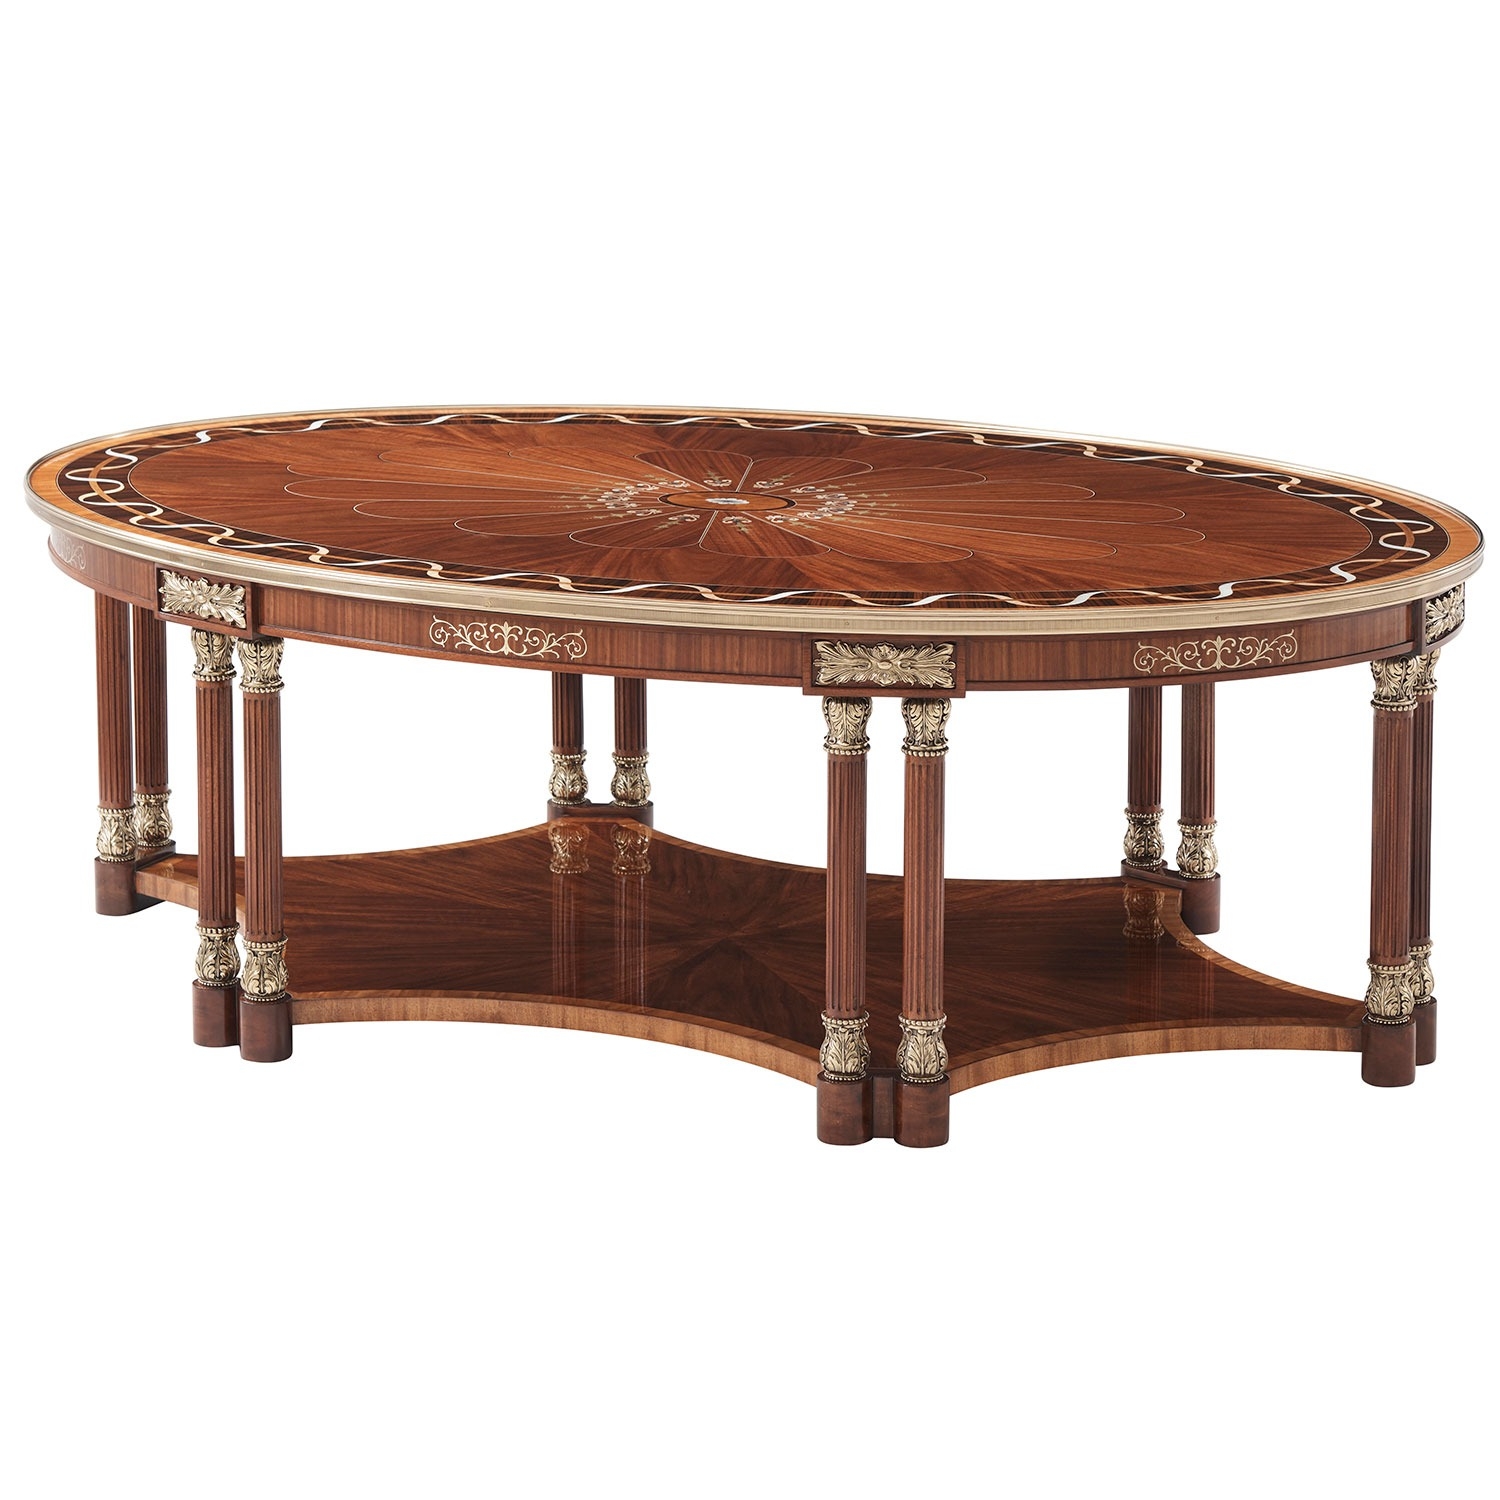 Theodore Alexander Mahogany Coffee Table with Floral Inlay